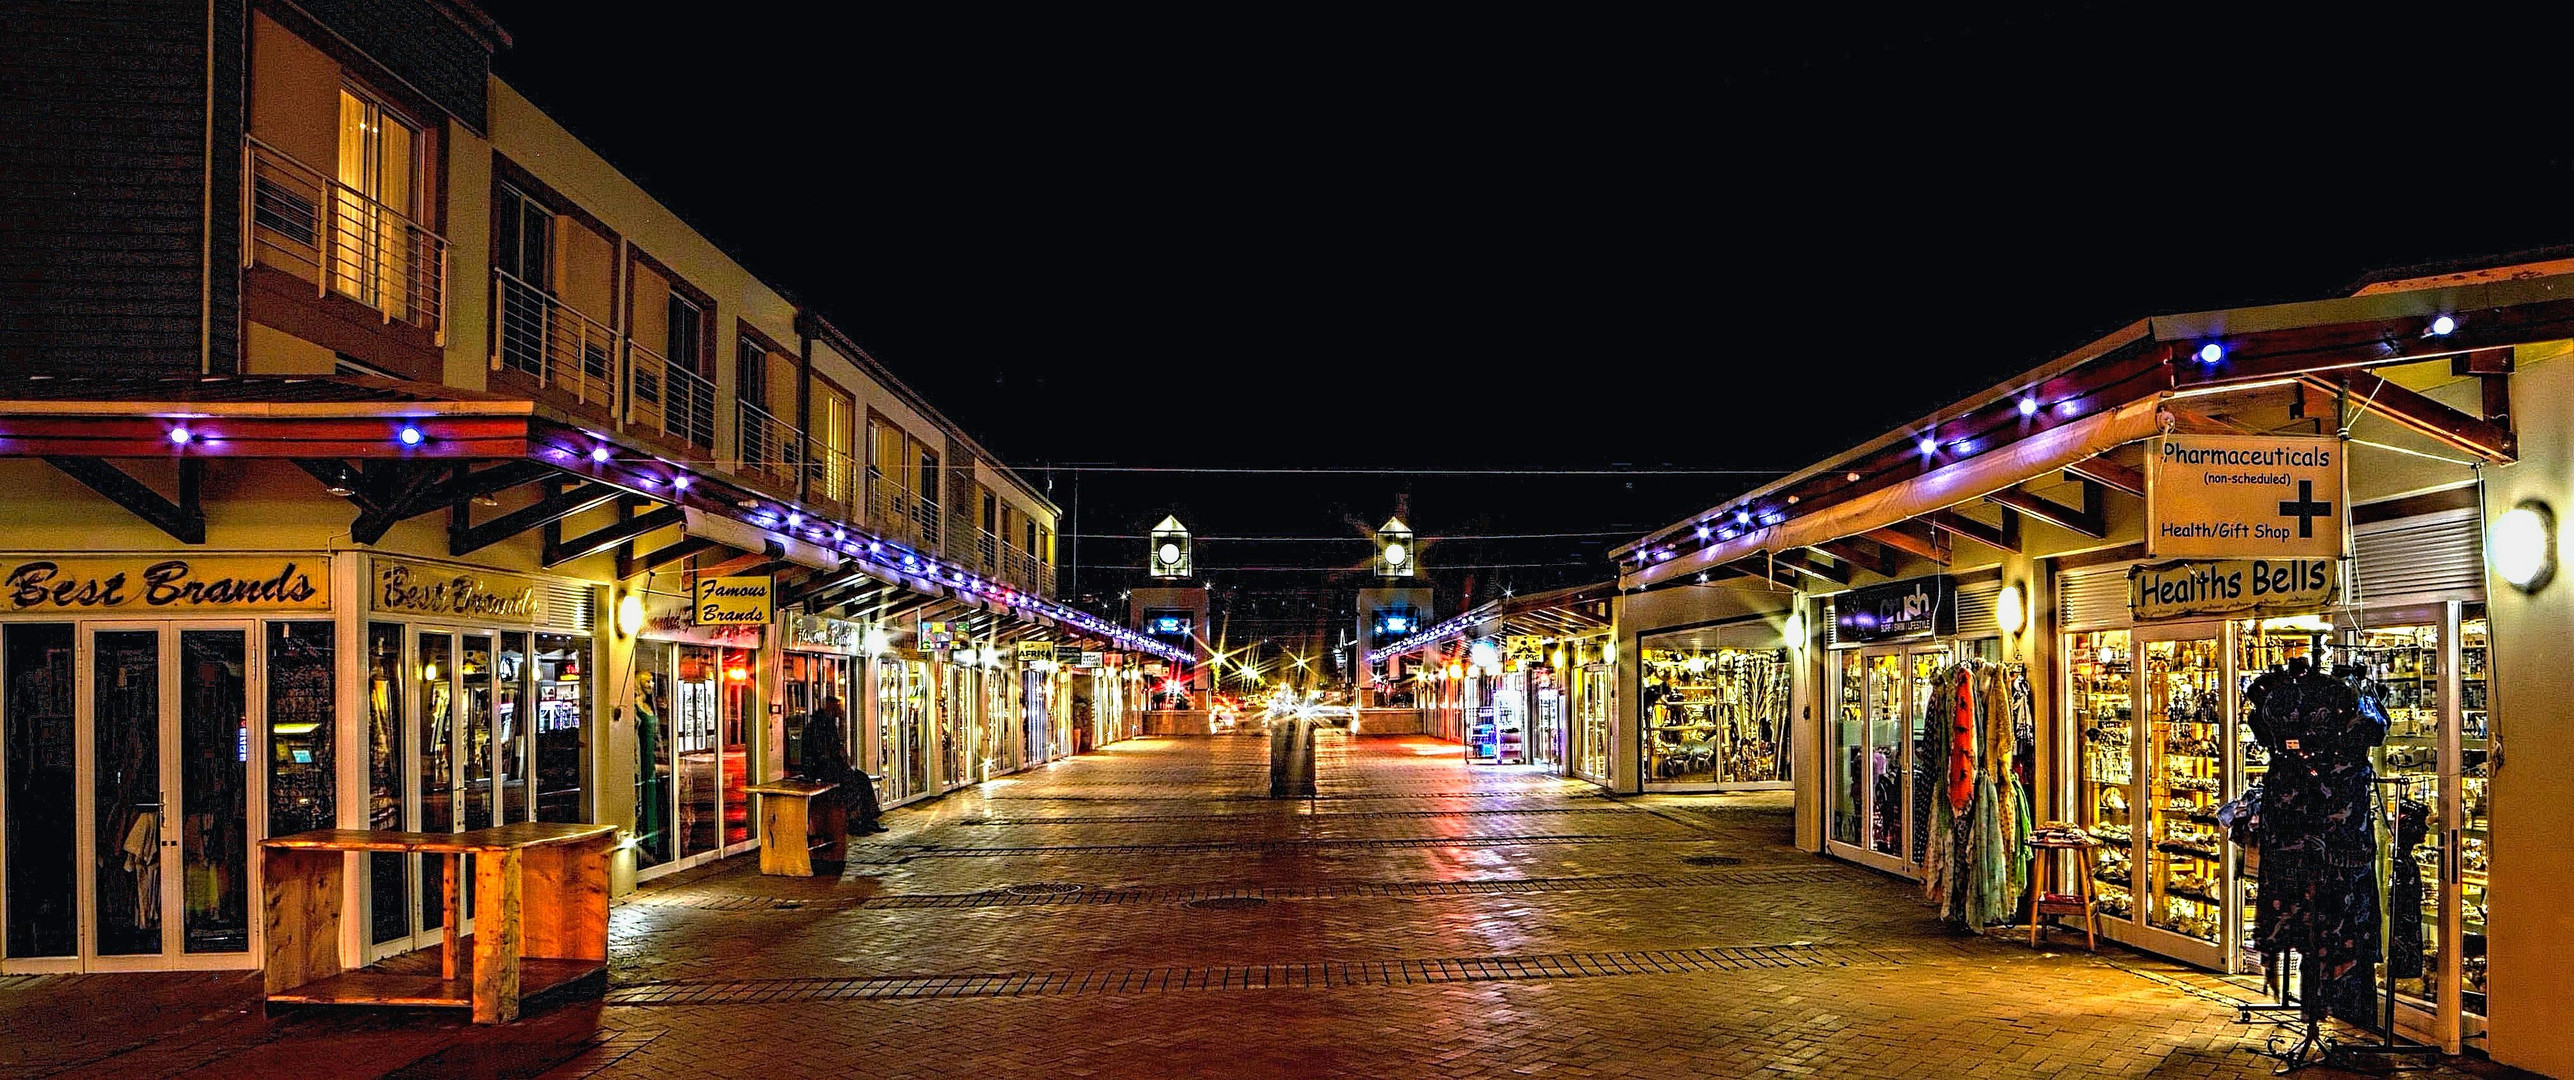 Midnight Waterfront Knysna, South Africa - shopping mile